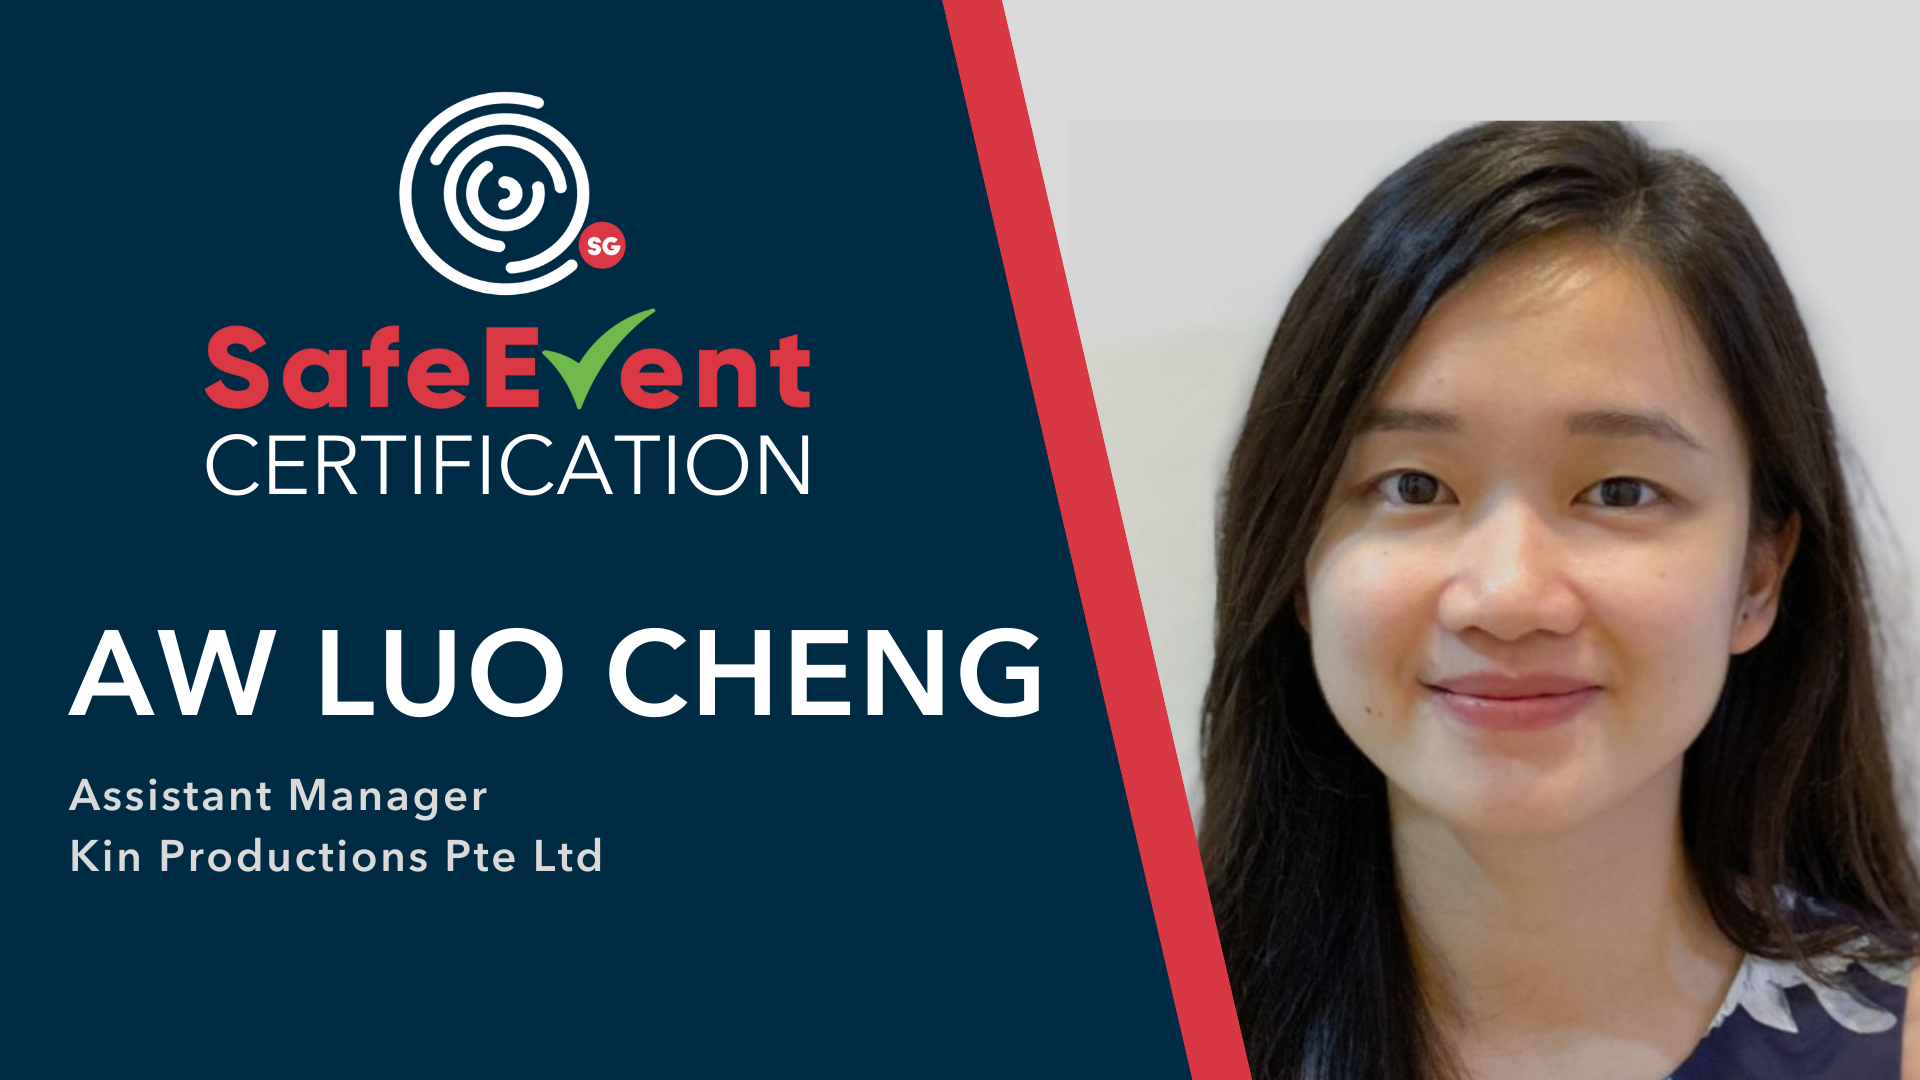 SG SafeEvent Certification: Aw Luo Cheng, Assistant Manager of Kin Productions Pte Ltd